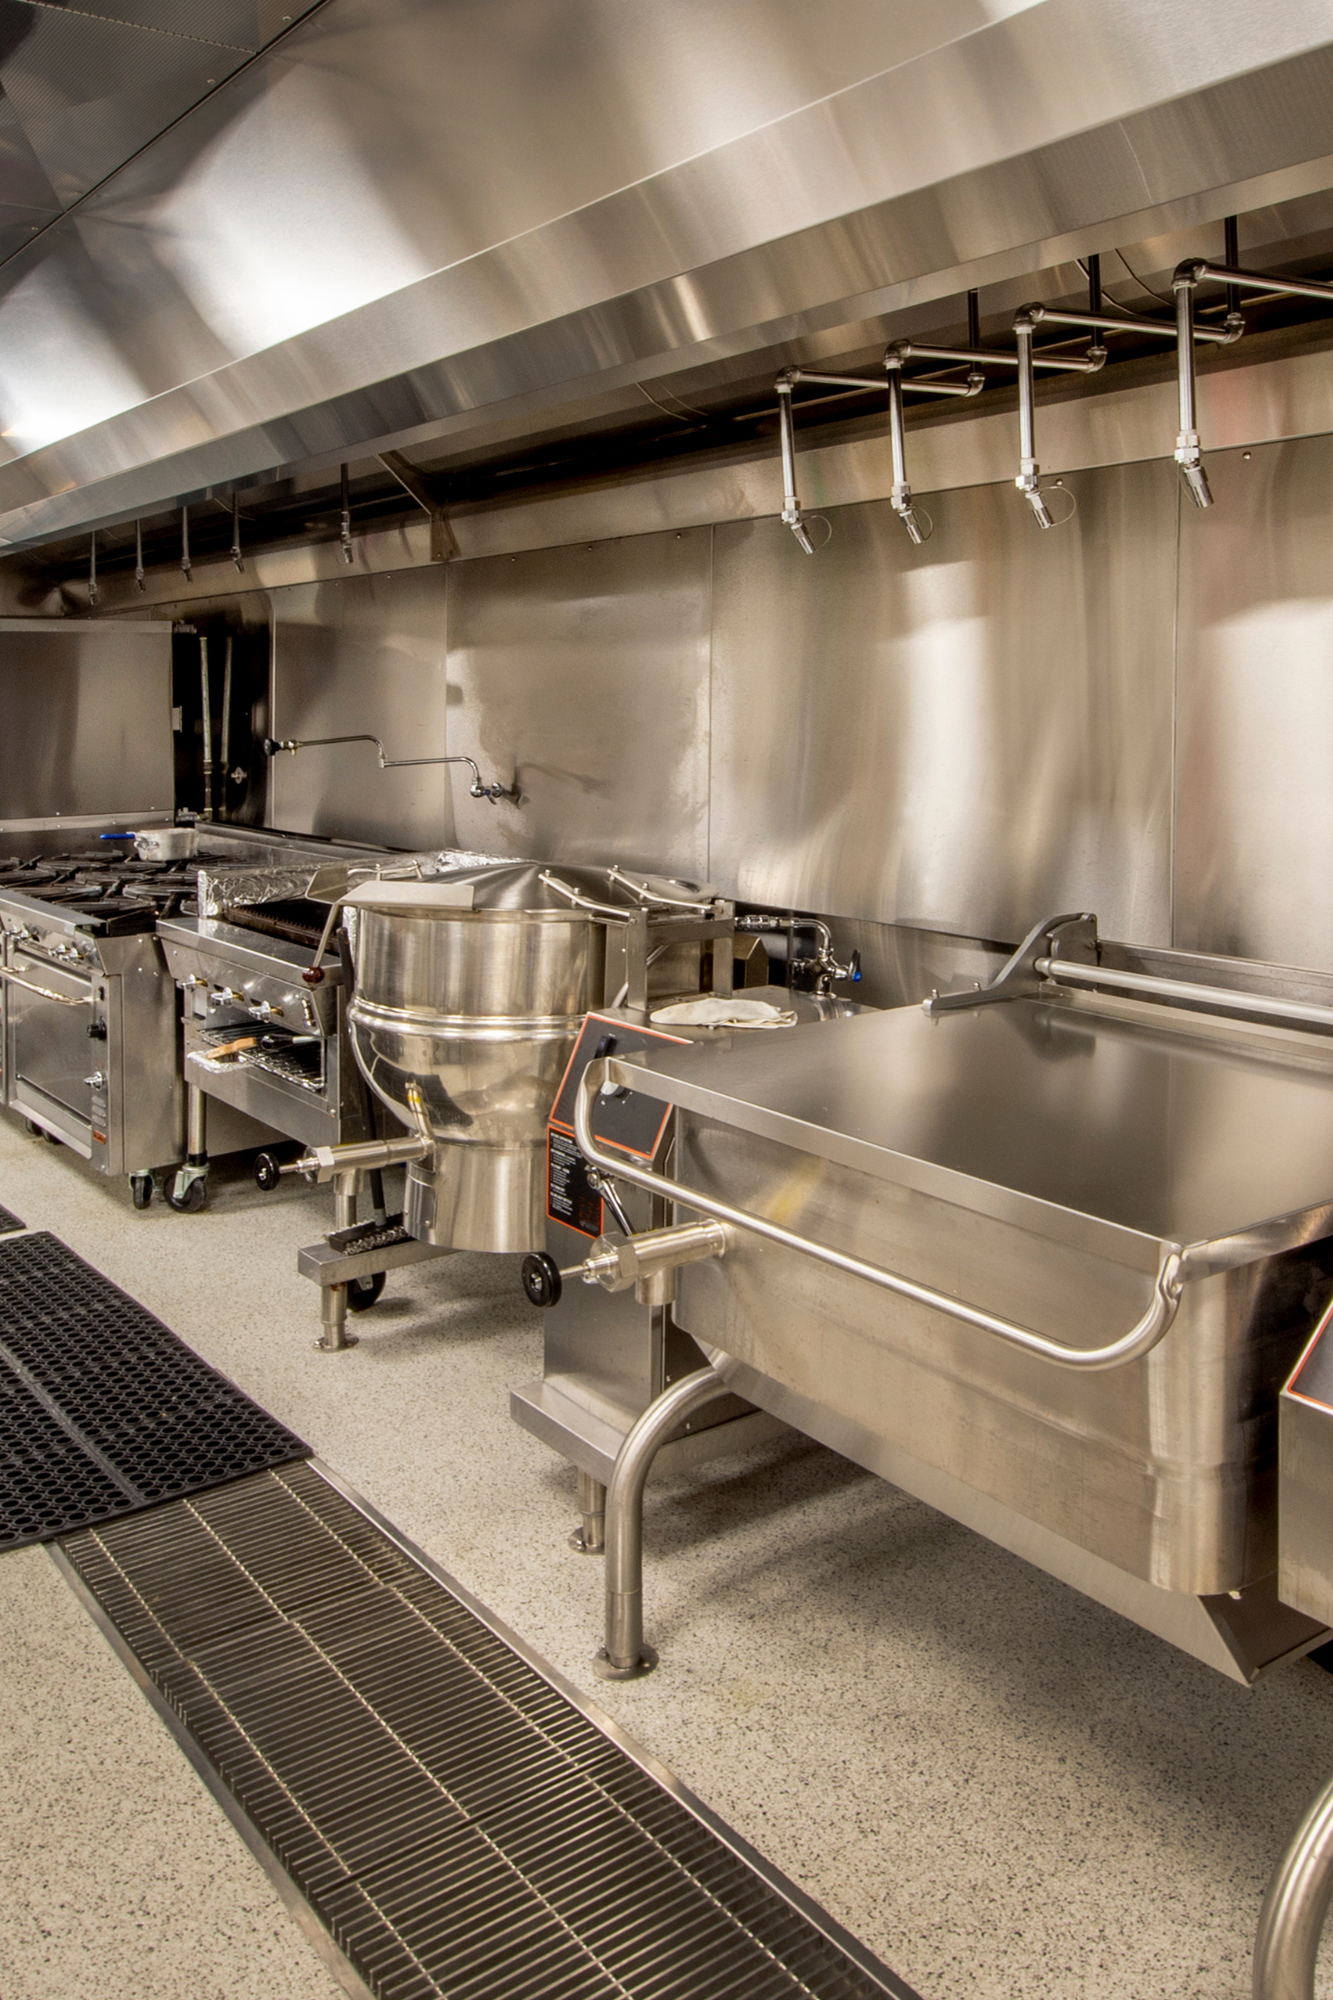 epoxy flooring for commercial kitchens